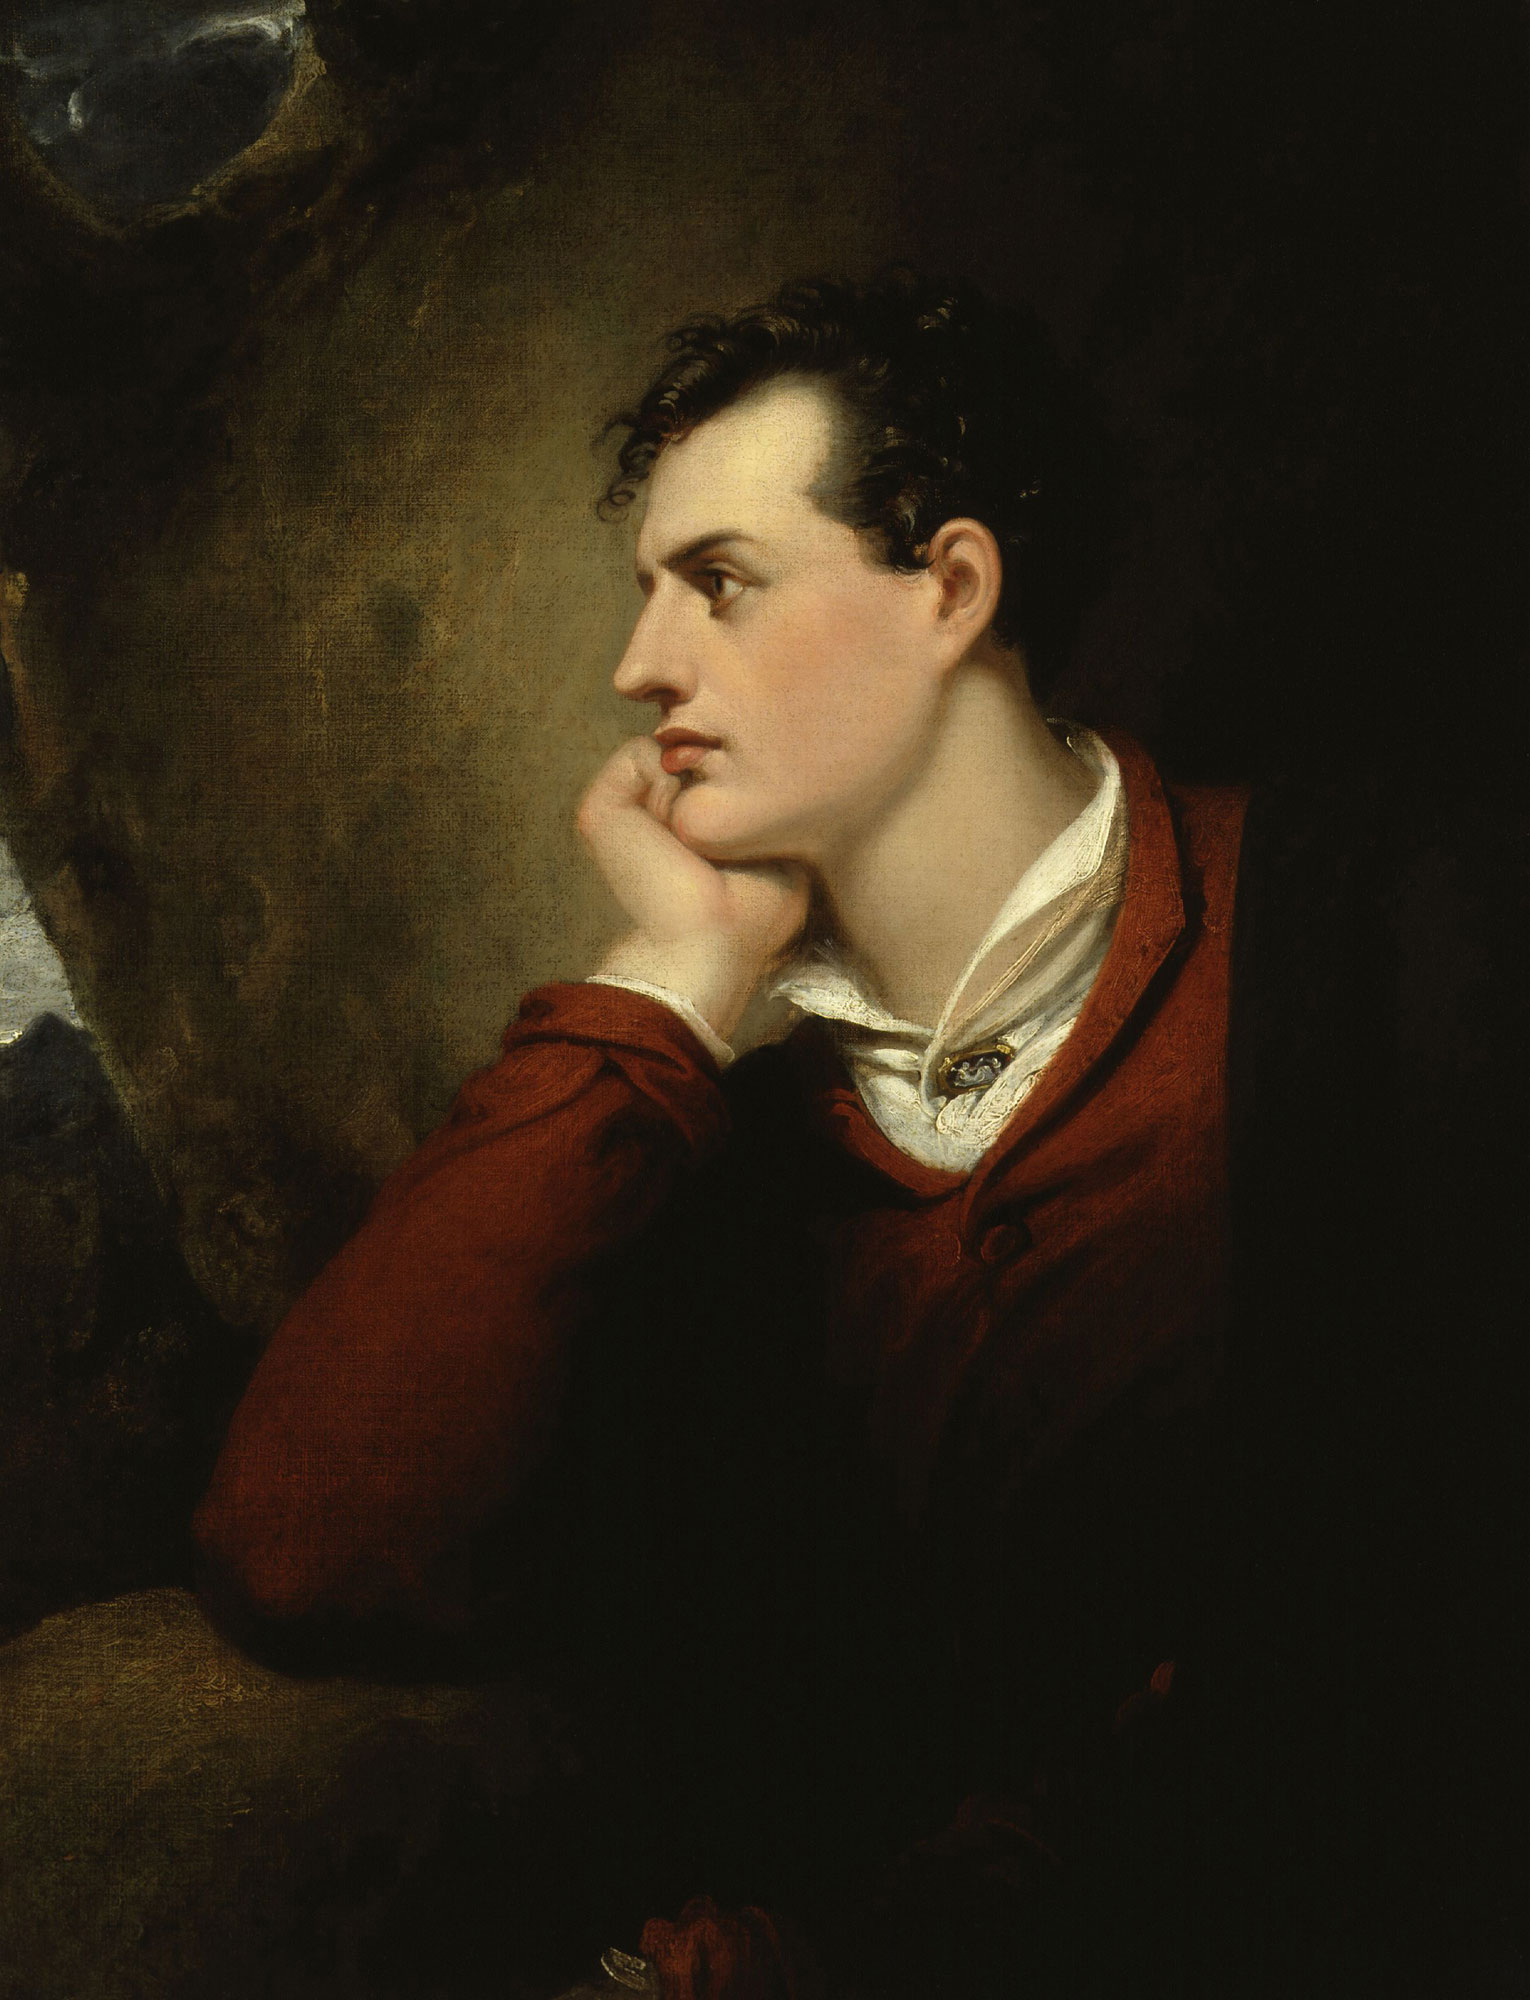 NSFW historical figure facts - lord byron